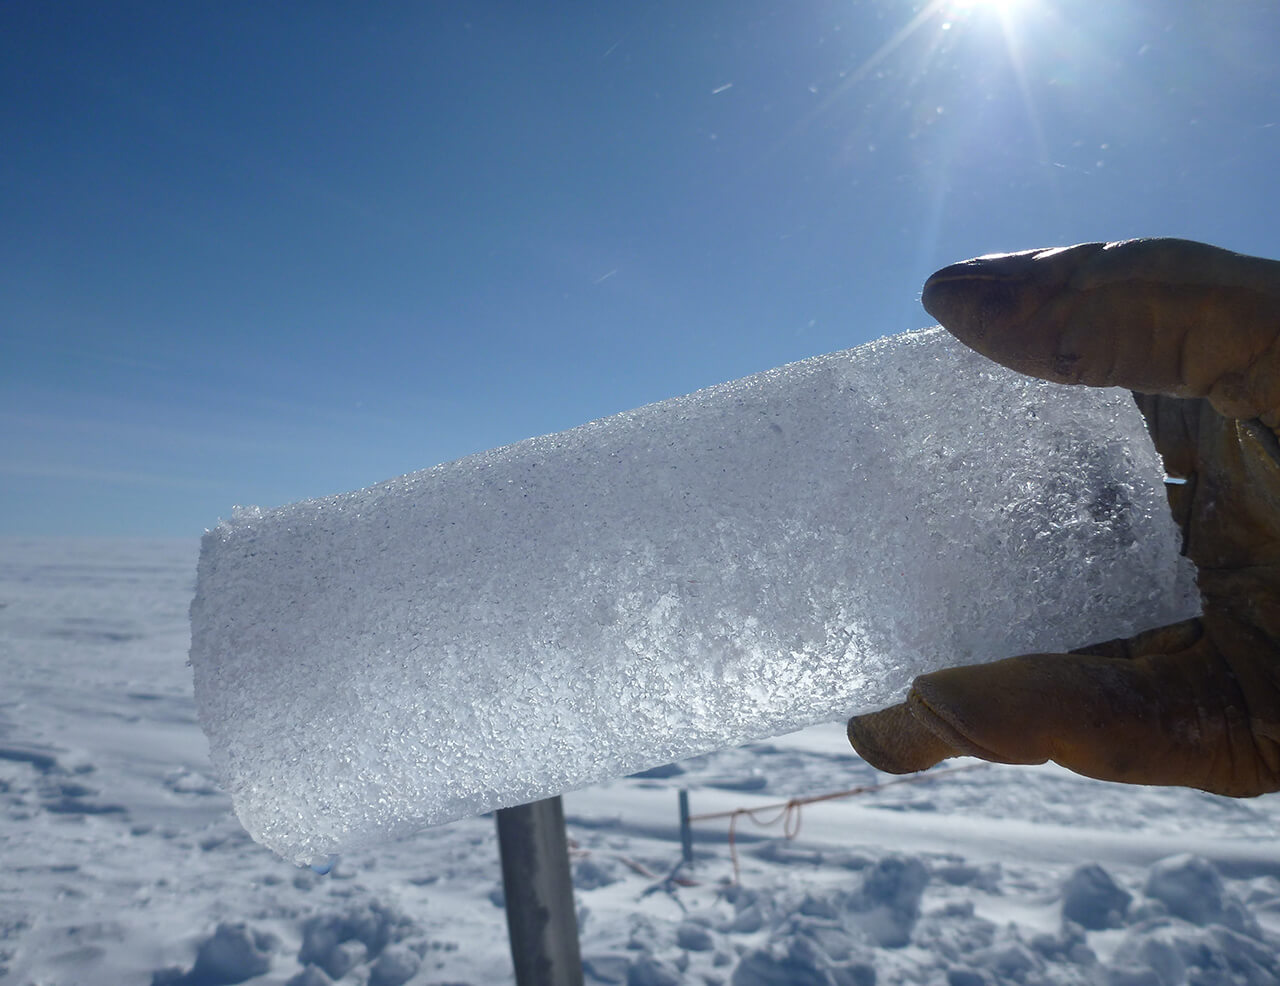 Photograph of a hand holding an ice core.